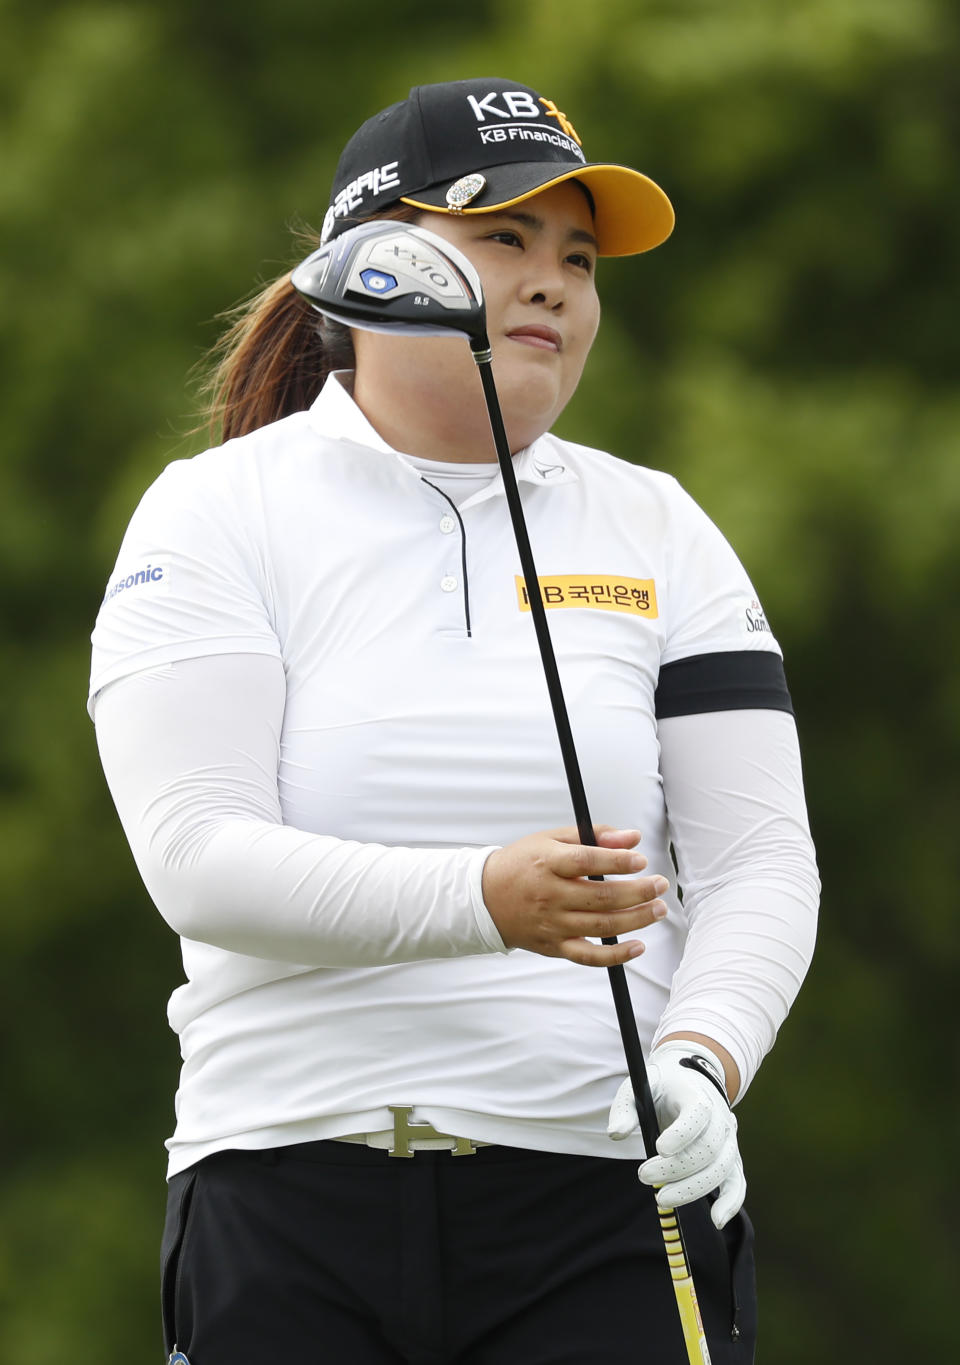 Inbee Park, of South Korea, watches her shot off the the 10th tee during the second round of the KPMG Women's PGA Championship golf tournament, Friday, June 21, 2019, in Chaska, Minn. (AP Photo/Charlie Neibergall)